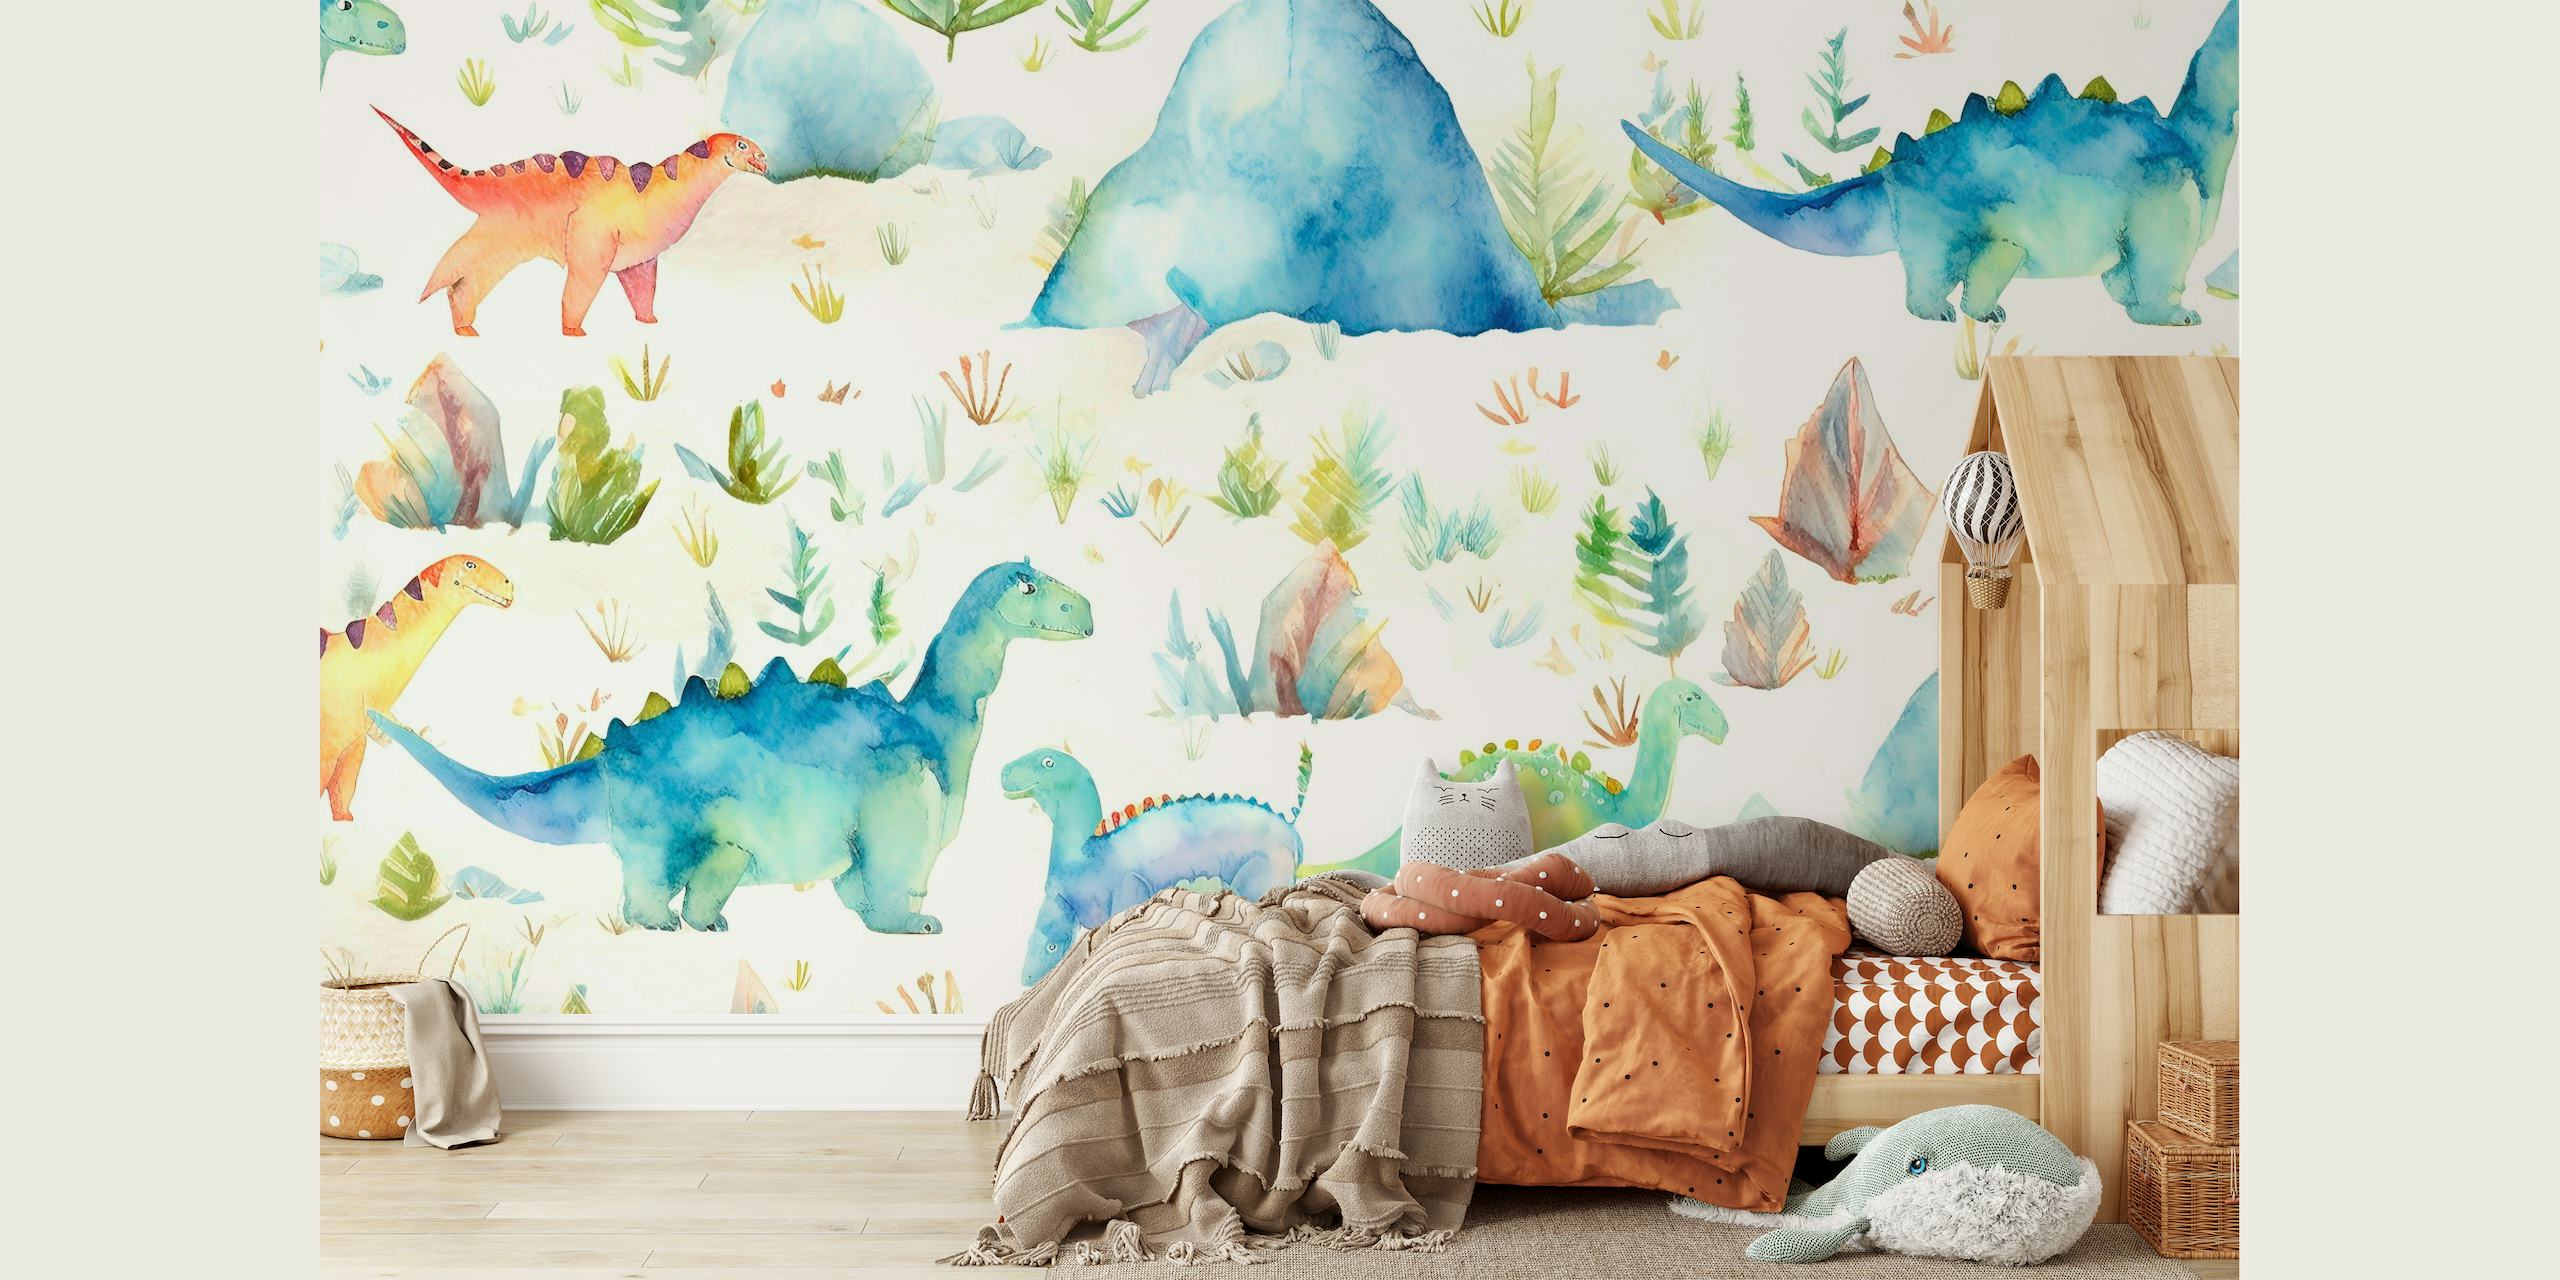 Watercolor dinosaurs wall mural with soft pastel tones and prehistoric scenery.